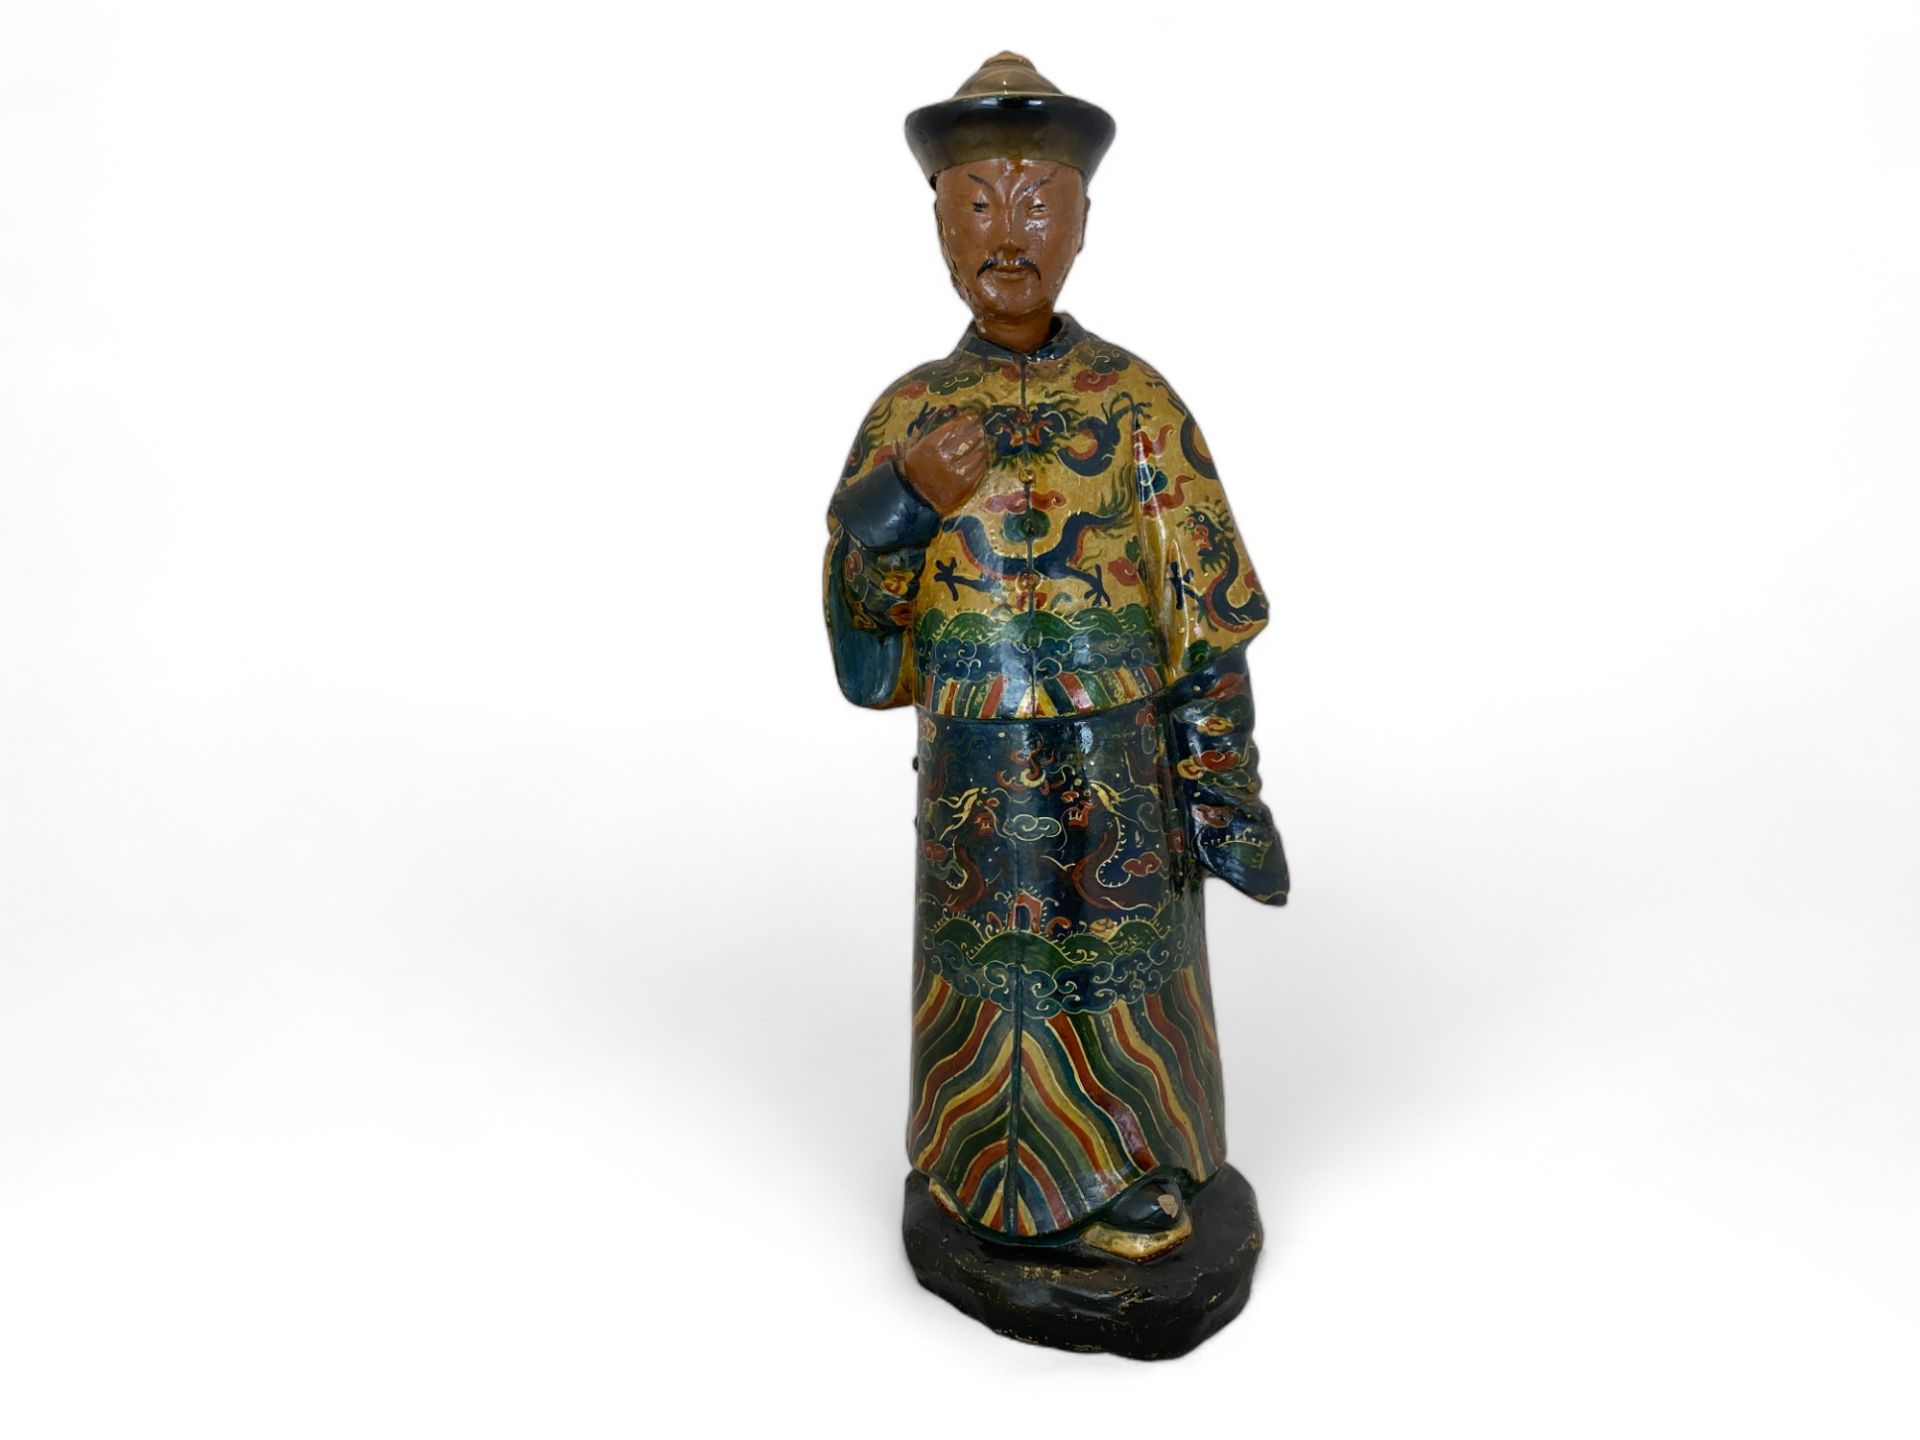 A 19th century Chinese-Export hand painted clay figure of a mandarin with nodding head